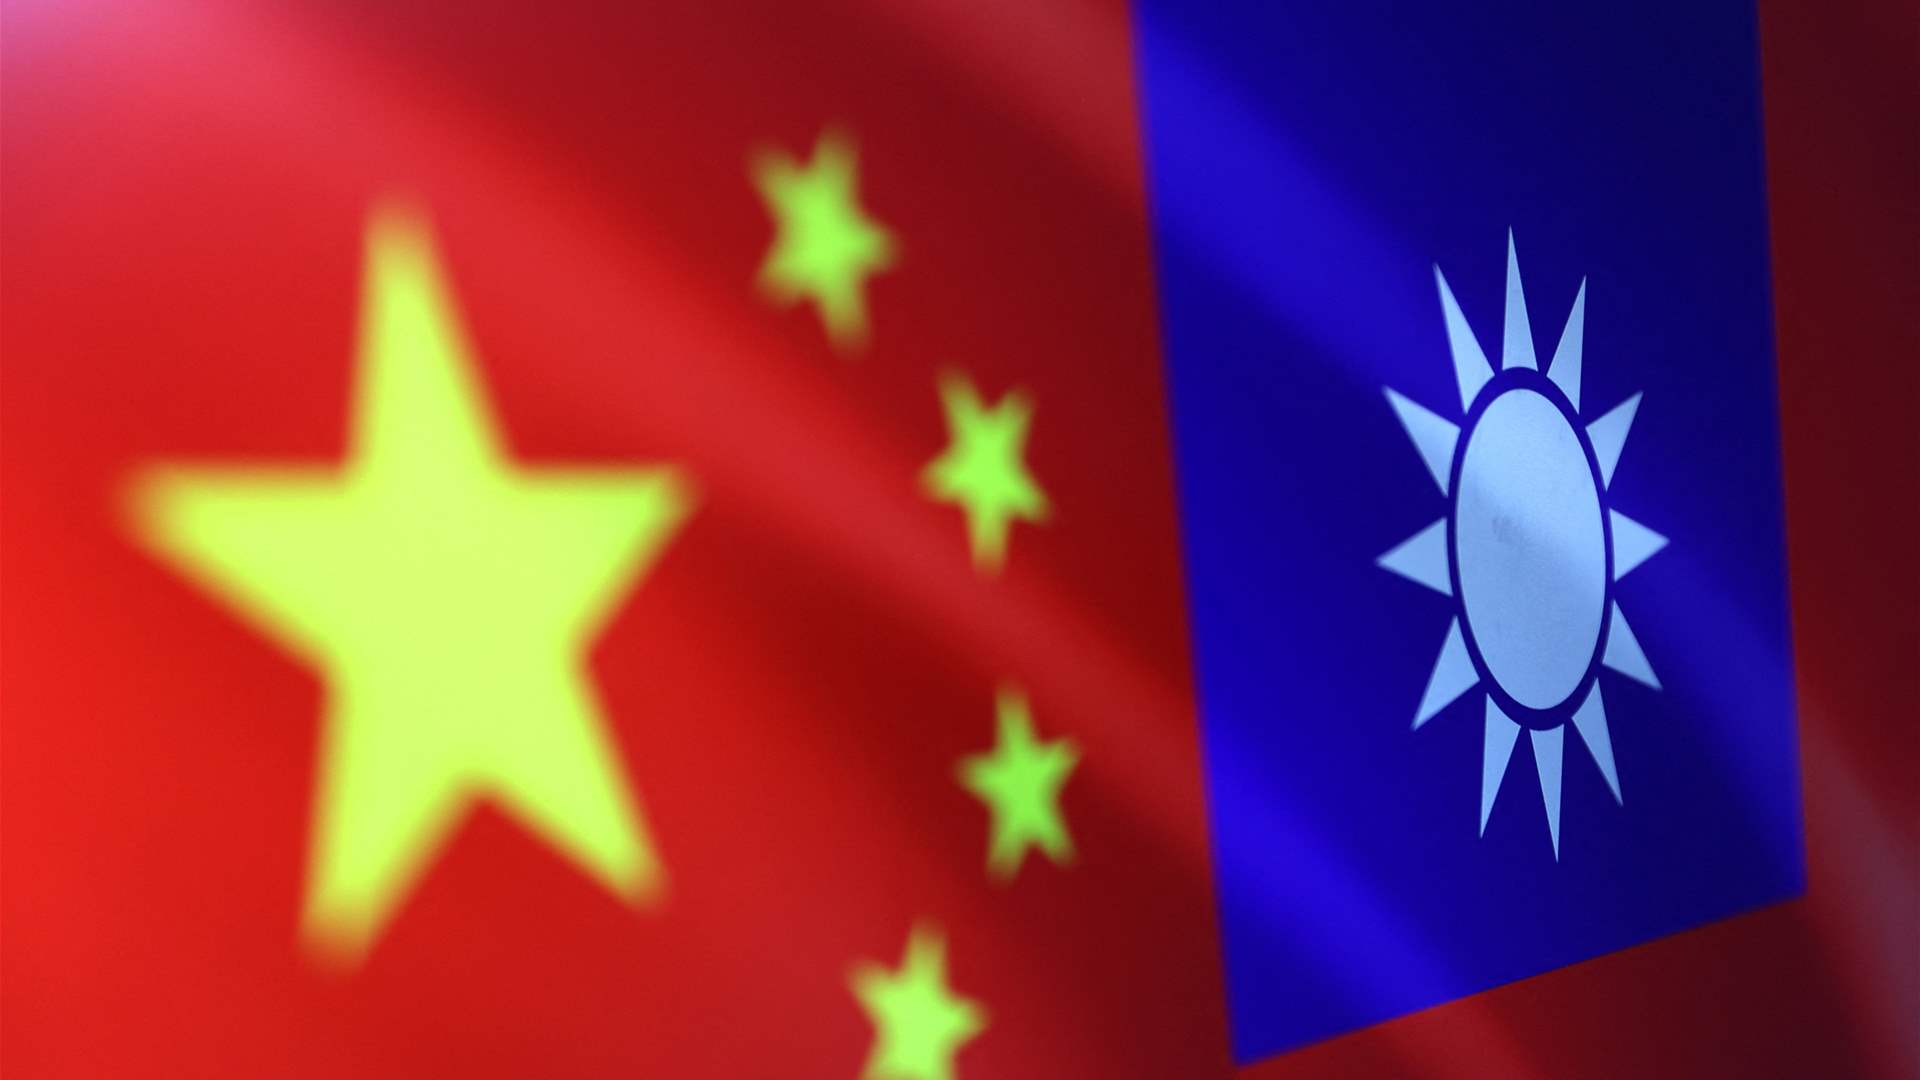 Taiwan&#39;s new President calls on China to &#39;stop political and military intimidation&#39;